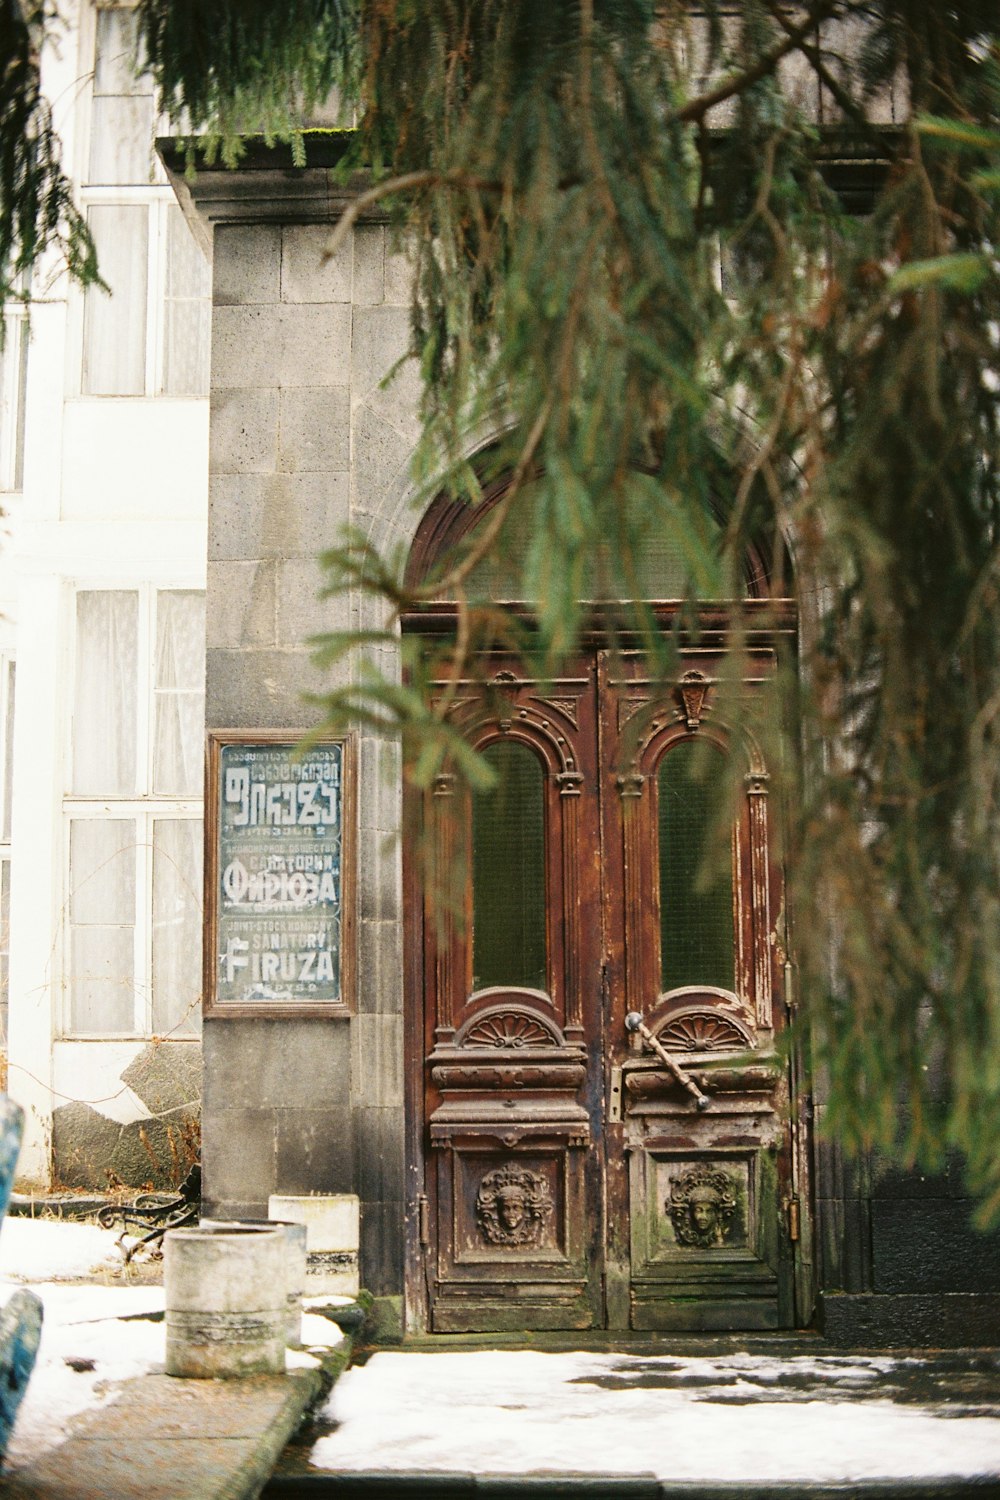 an old building with a wooden door and window